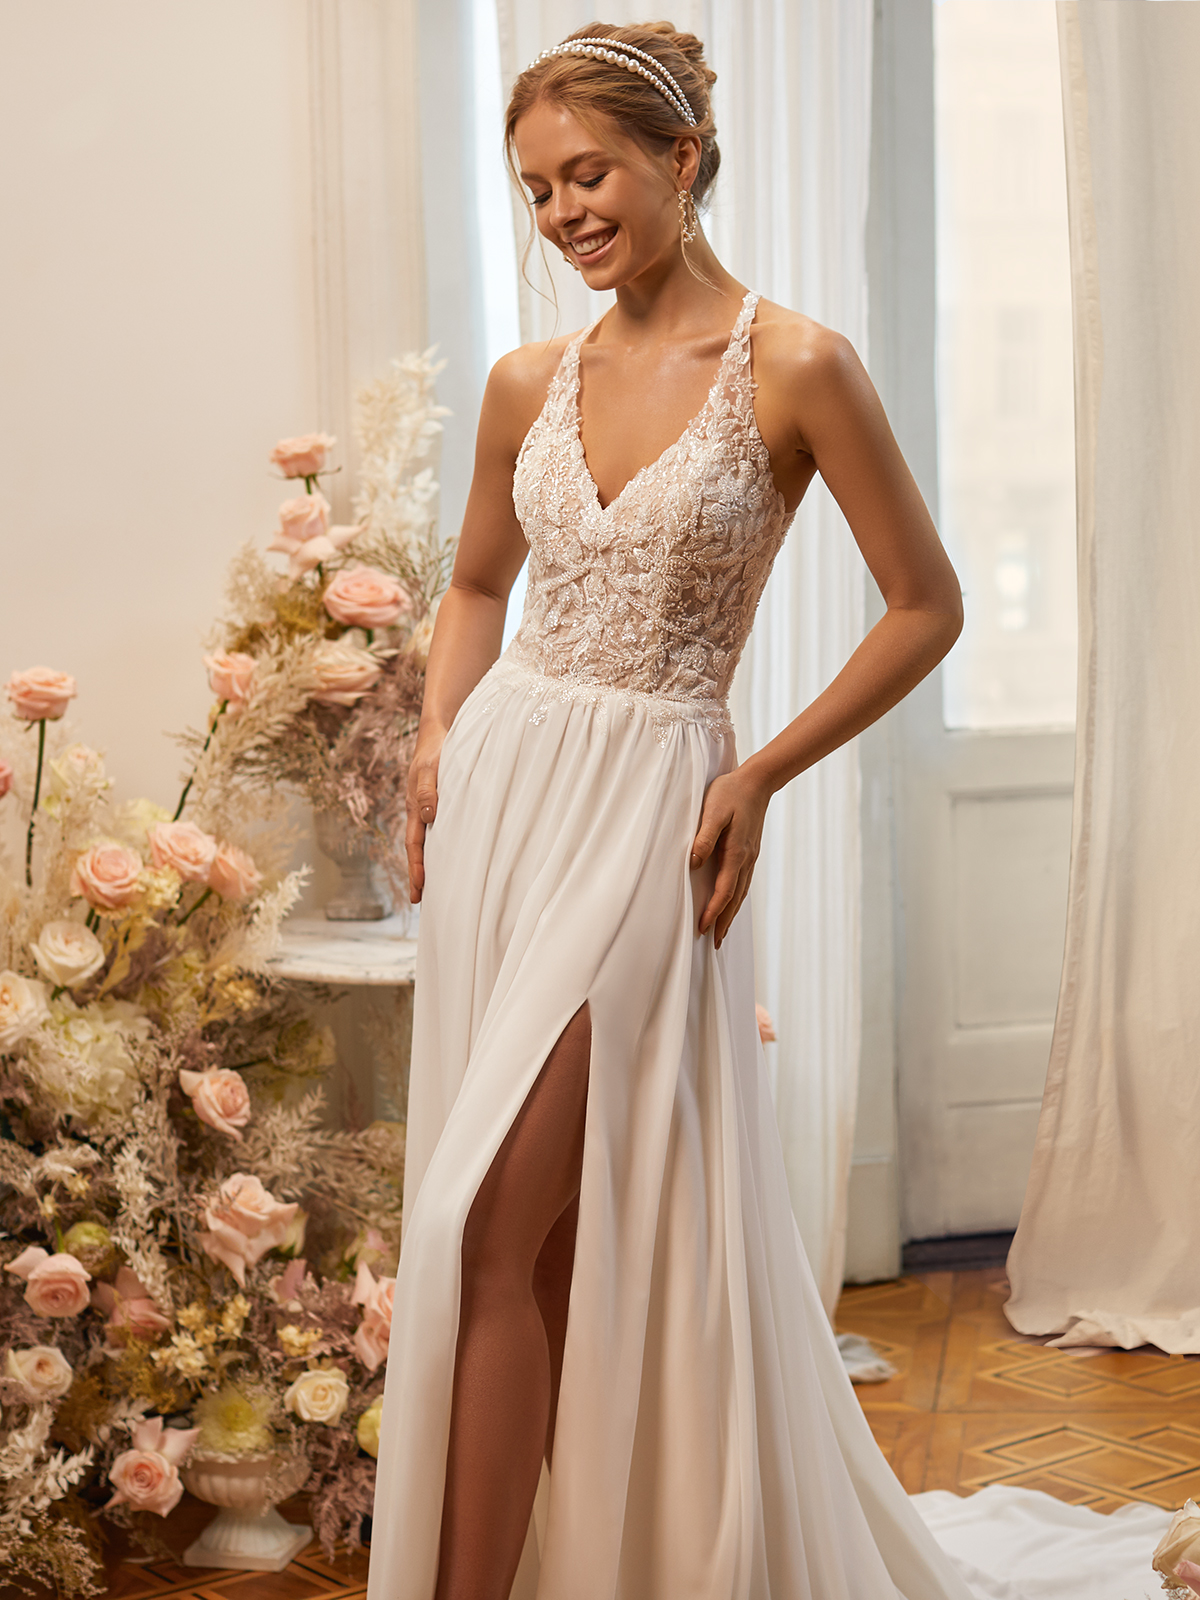 20 Classic Wedding Dresses for Brides With Timeless Style